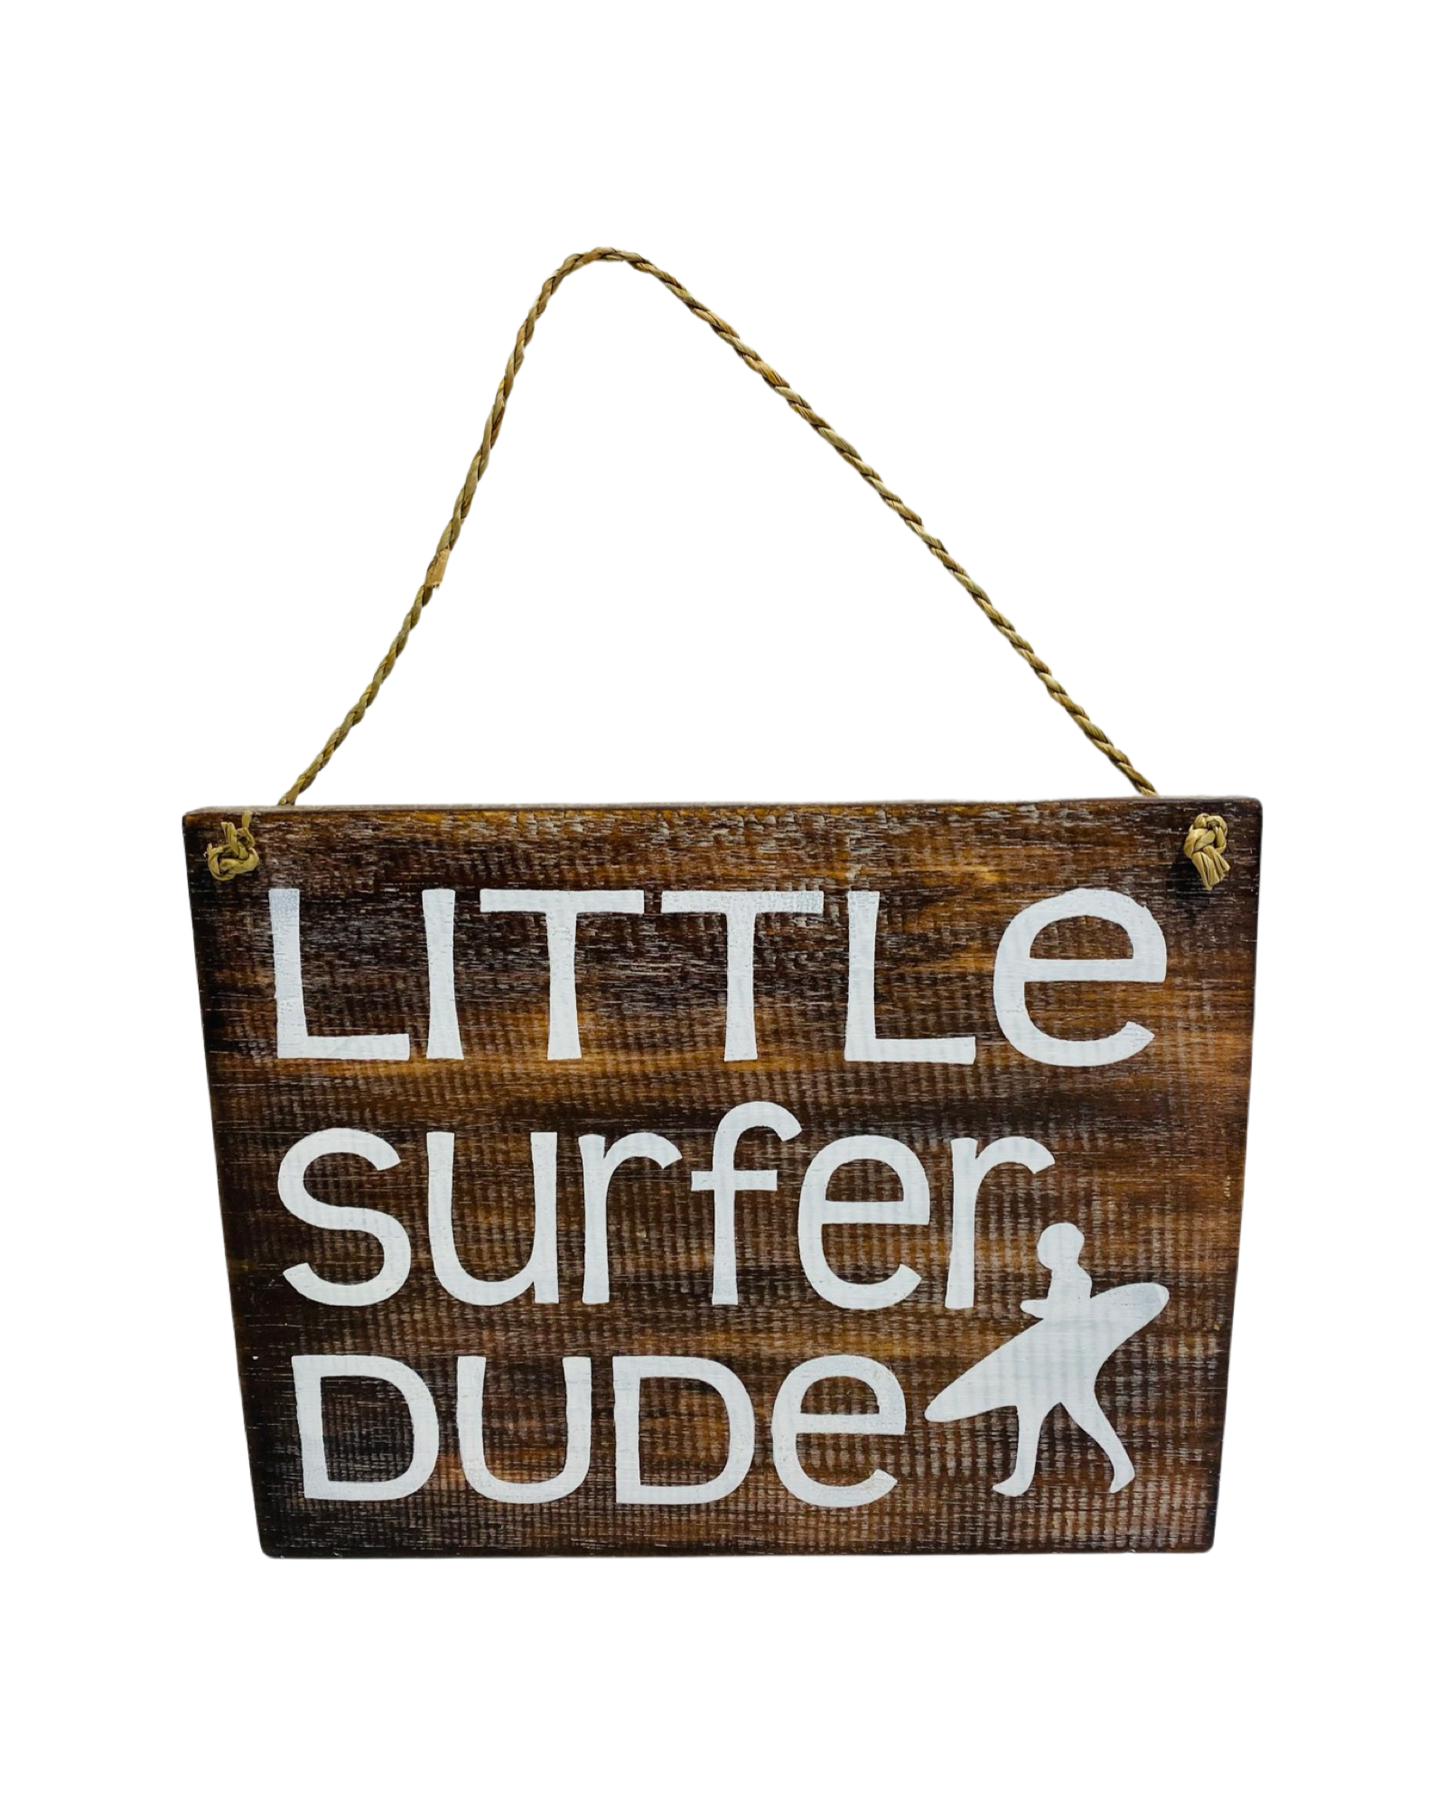 Little Surfers Signs